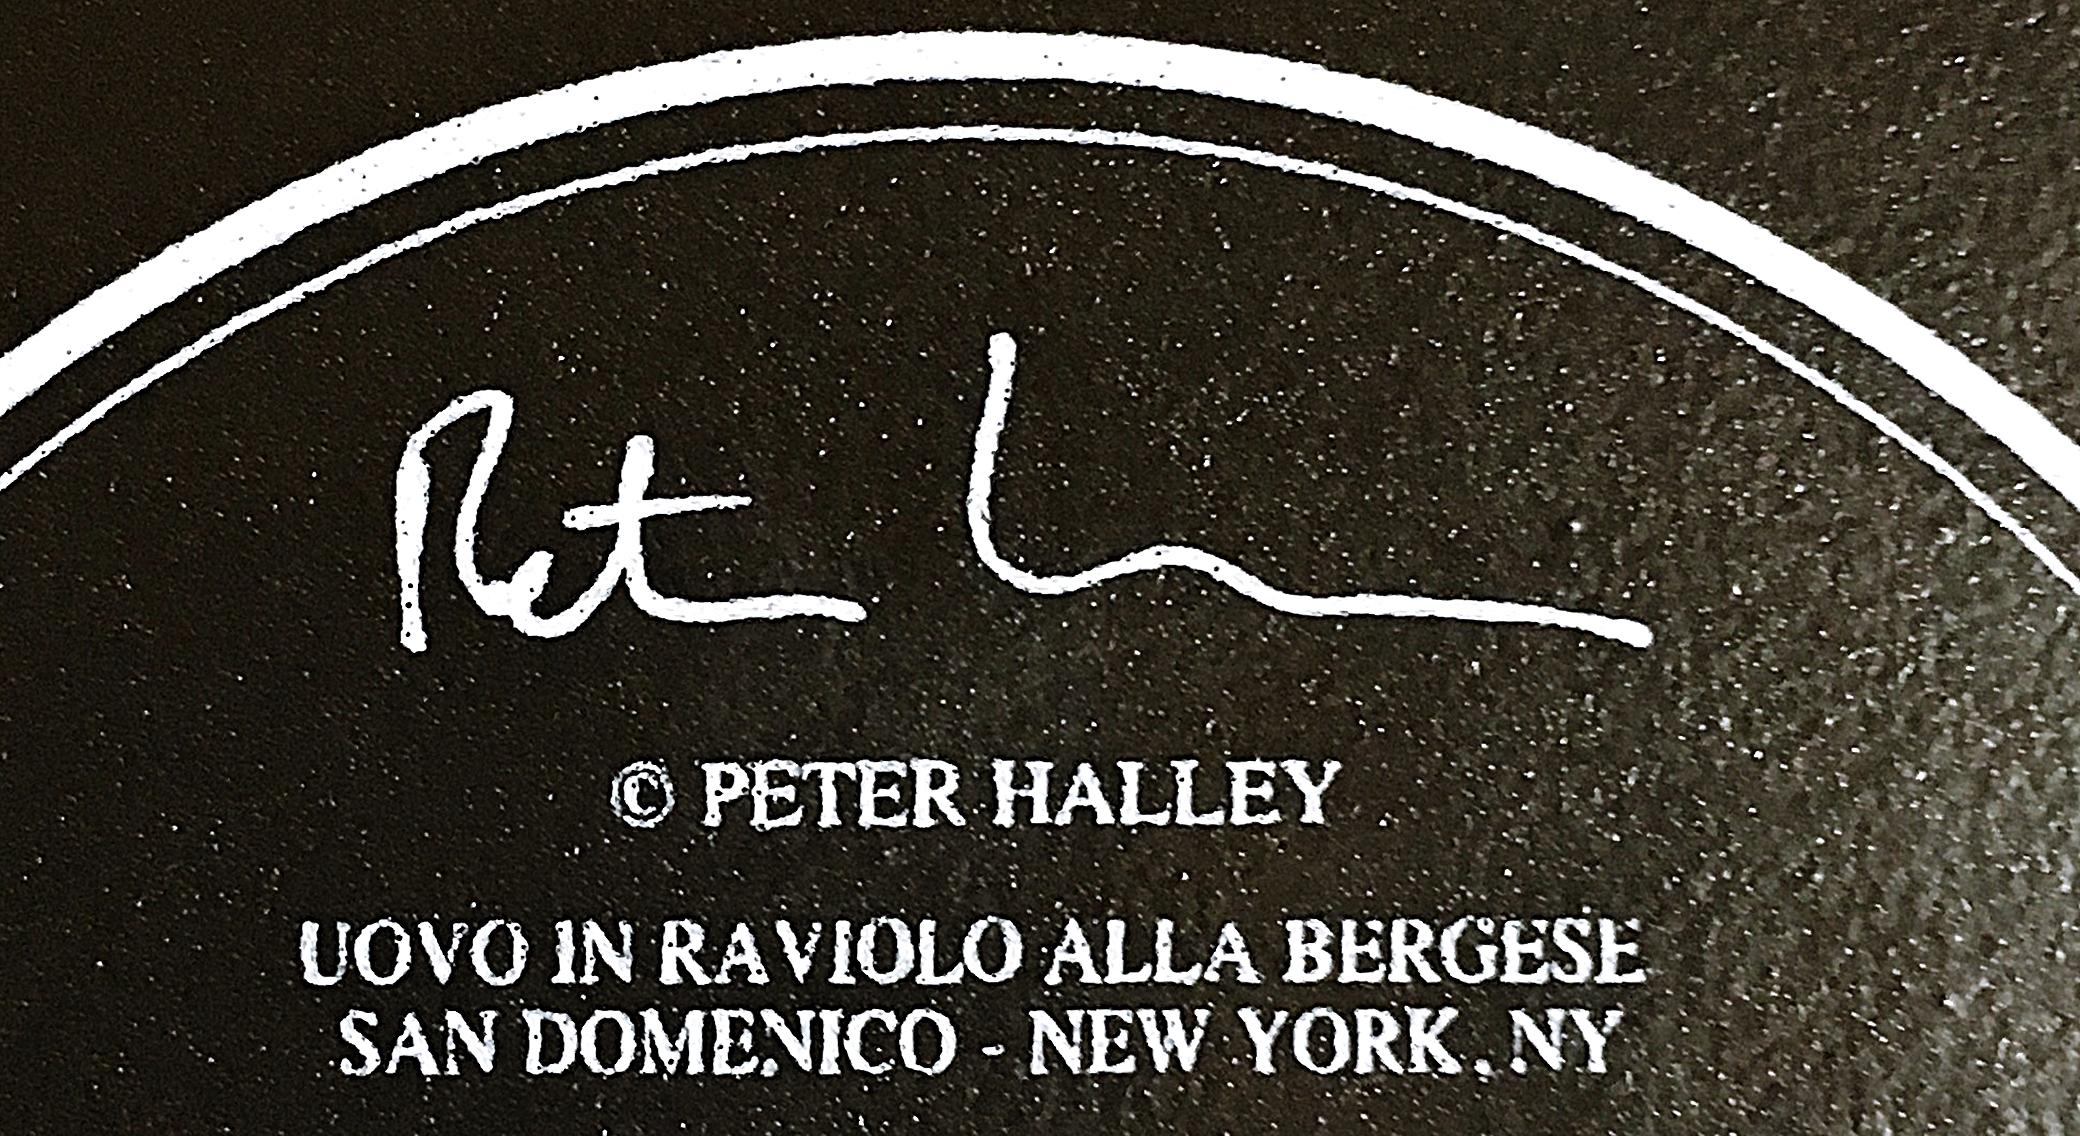 Peter Halley
Uovo In Raviolo Alla Bergese - San Domenico - New York, NY, ca. 2000
Limited Edition Ceramic Plate. 
Artist signature fired into the plate on the underside and numbered 166 from the edition of 510.
10 3/10 inches diameter by 1/4 inch